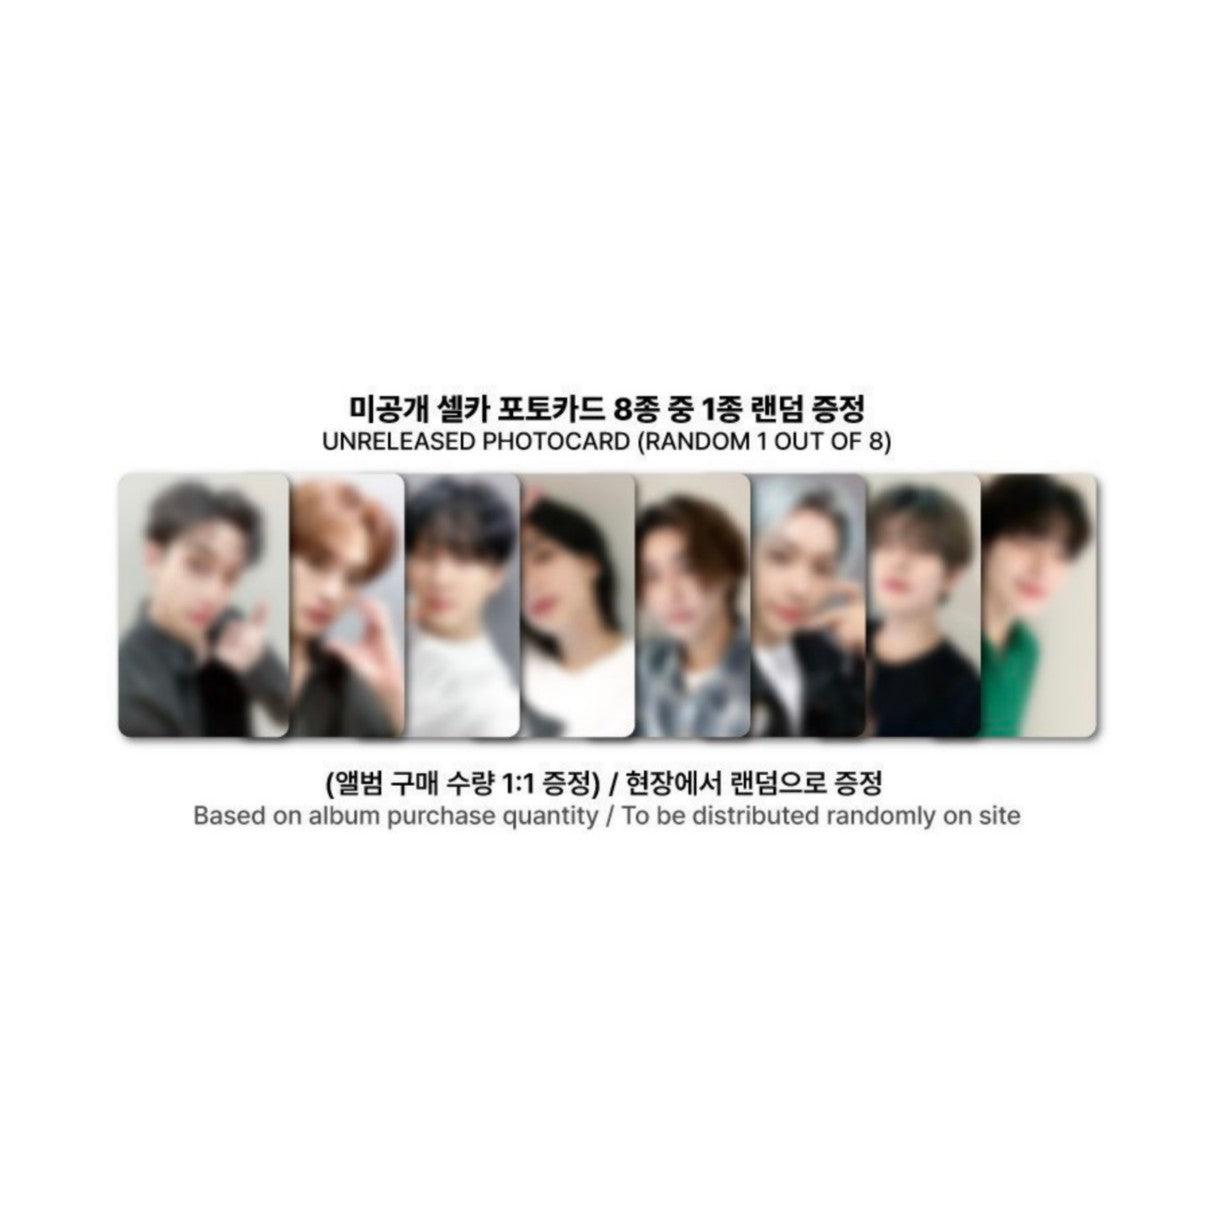 StrayKids 5-STAR Seoul Dome Tour Unveil13 Limited LuckyDraw - KKANG